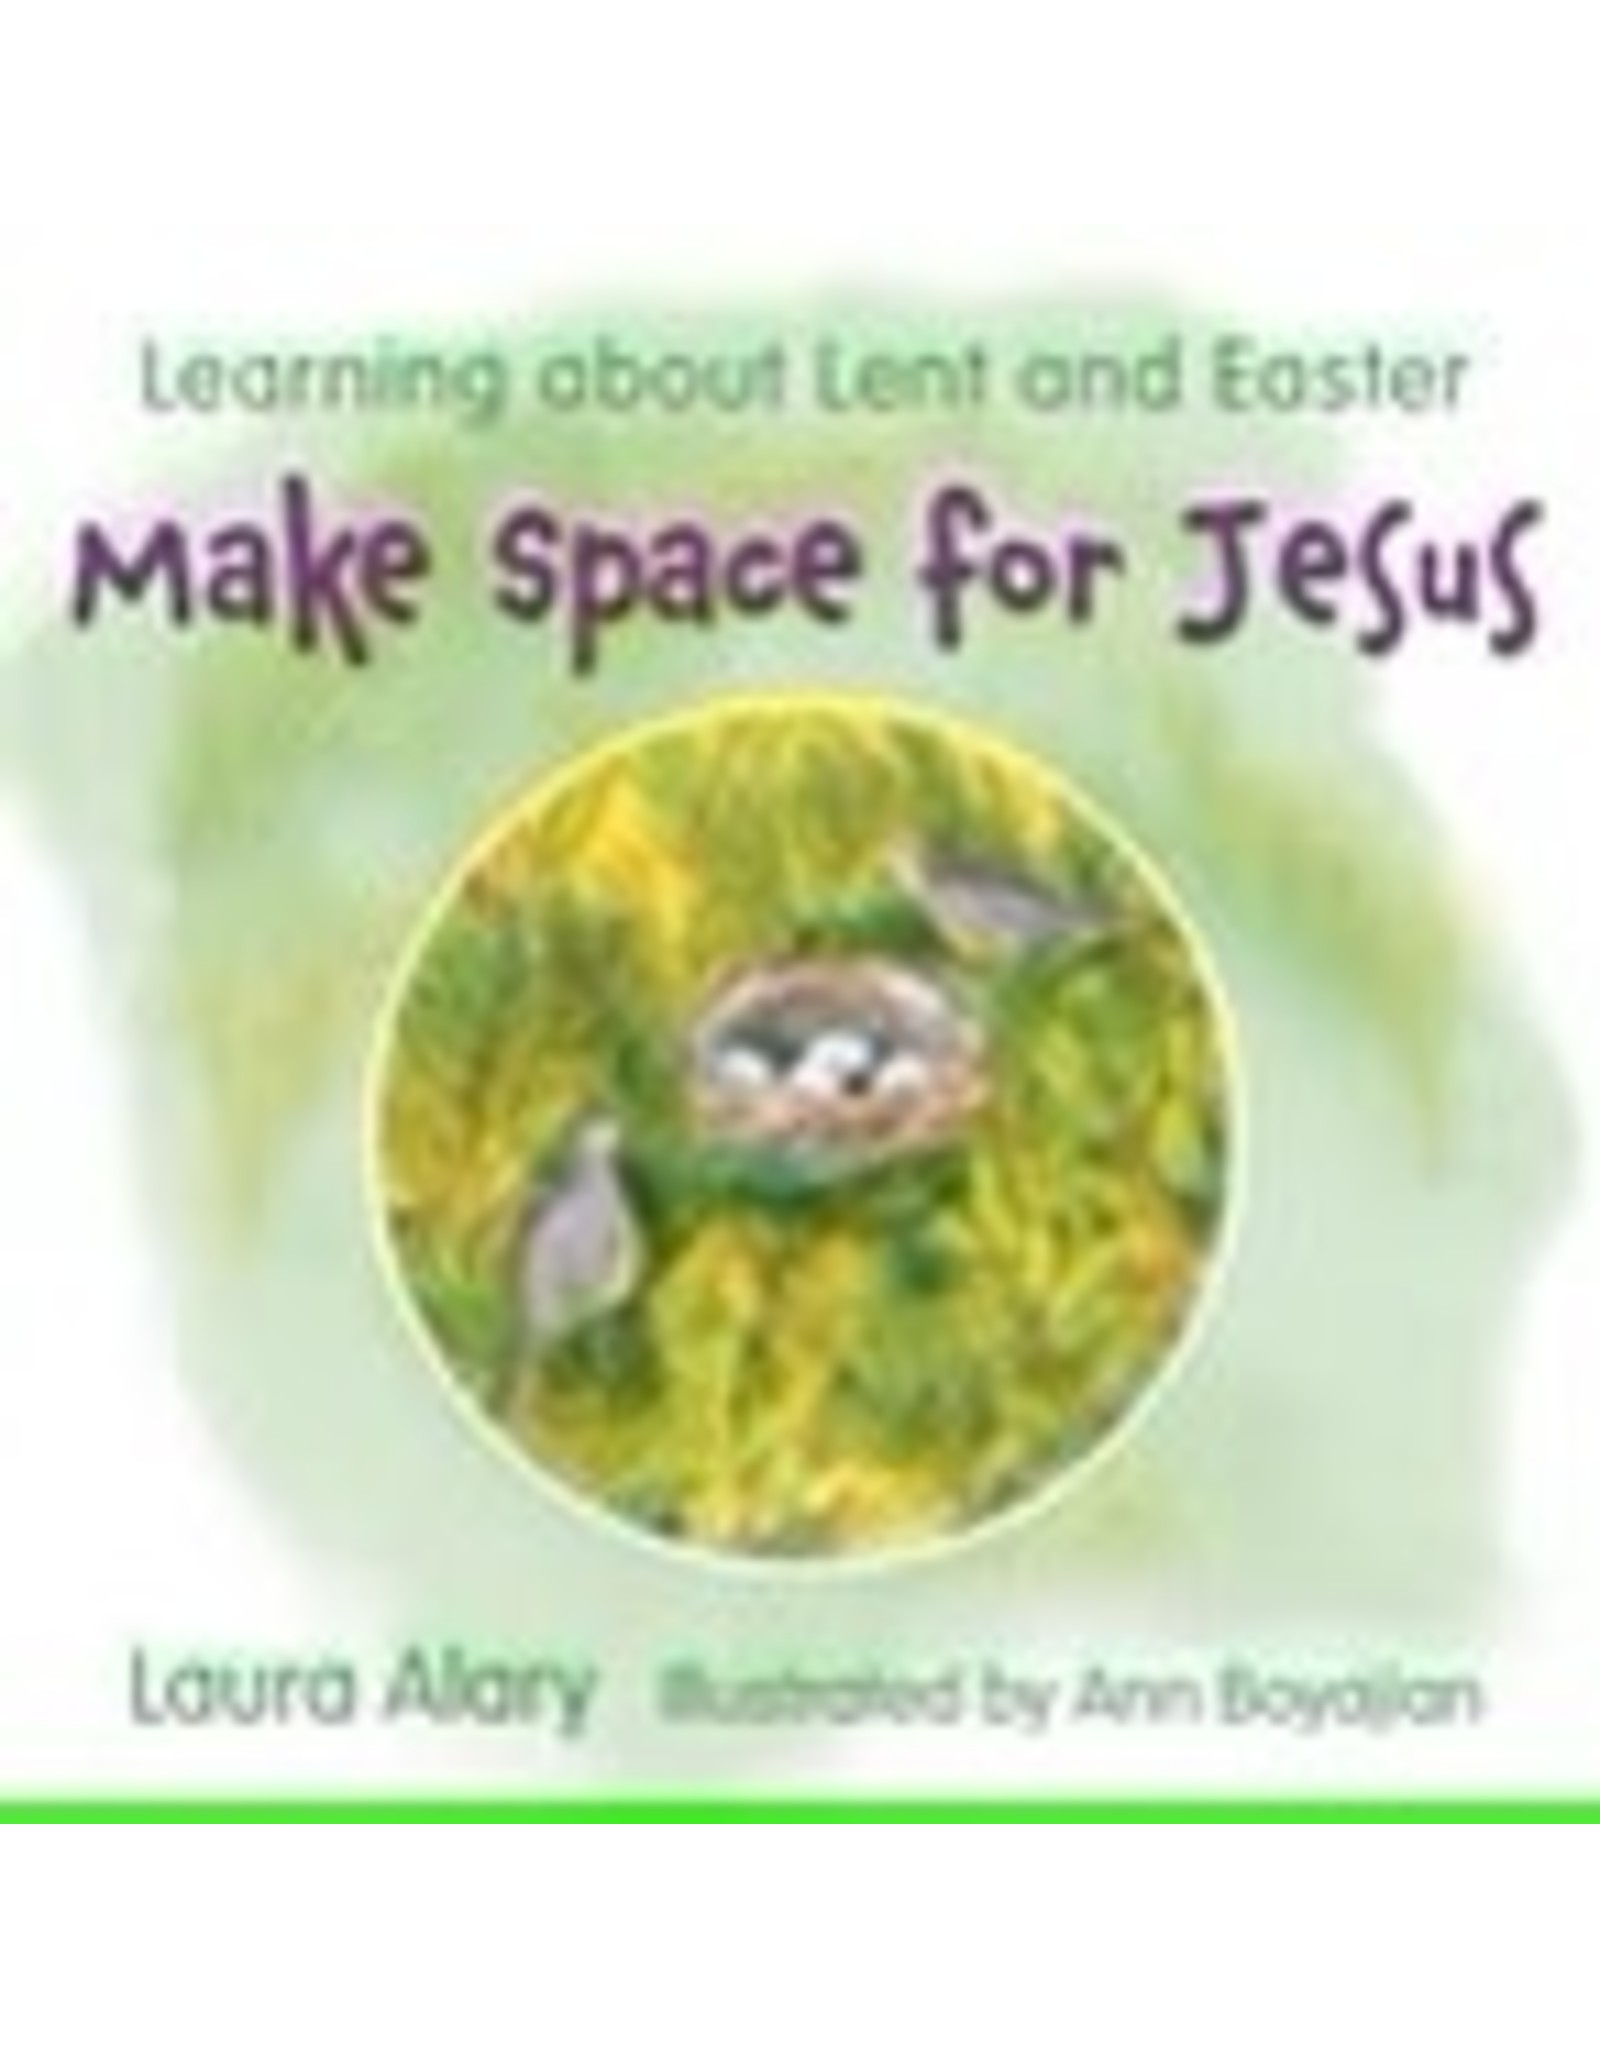 Paraclete Press Make space for Jesus: A Child's Guide to Lent and Easter by Laura Alary